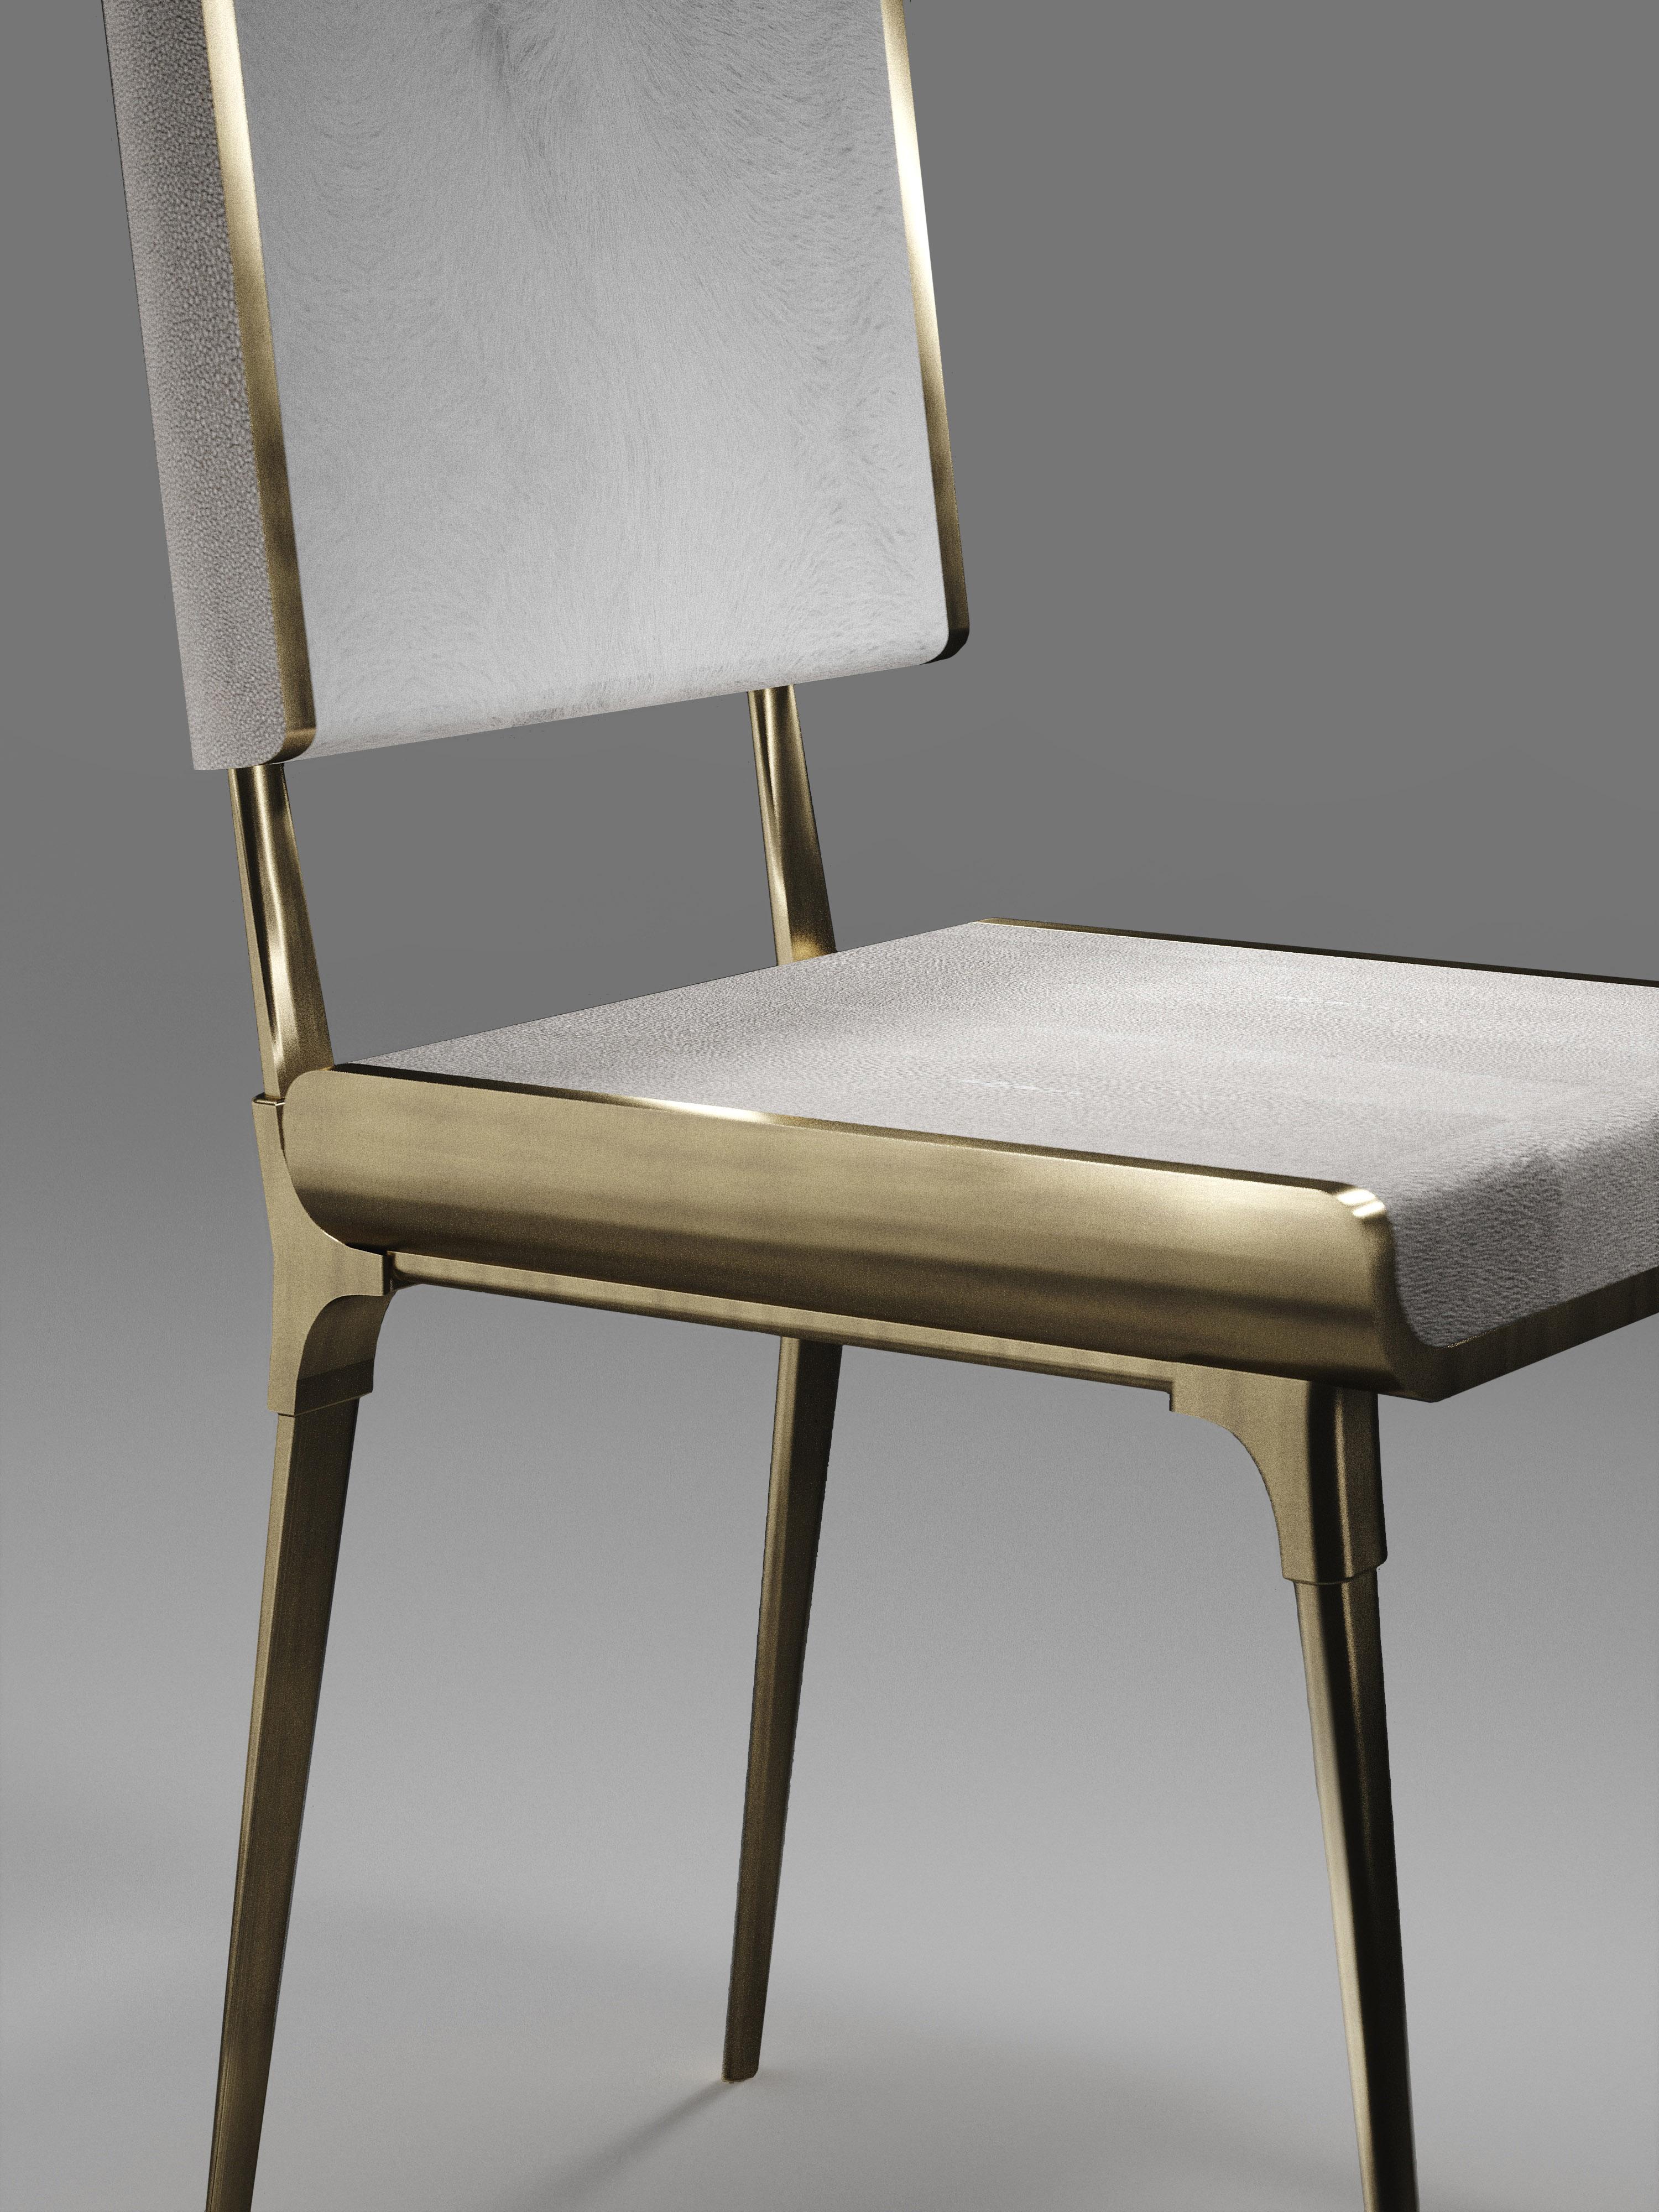 Contemporary Shagreen Dining Chair with Bronze-Patina Brass Details by Kifu Paris For Sale